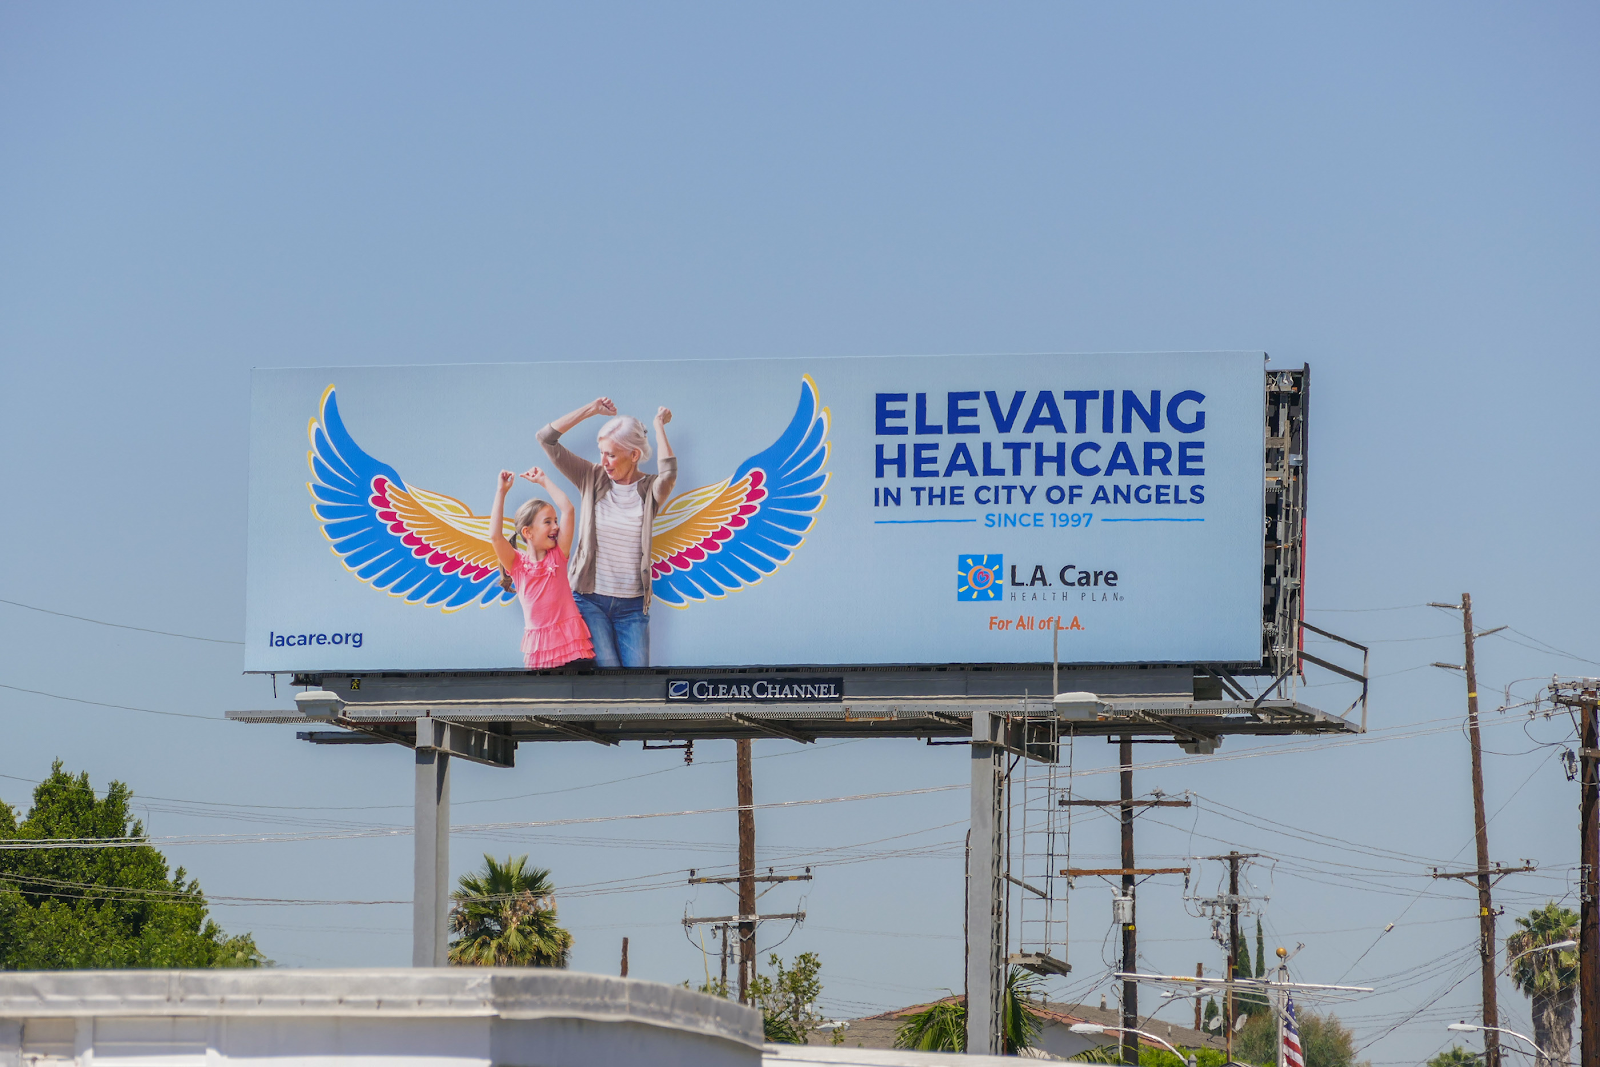 LA Care billboard with an old woman and a kid dancing with wings behind them, with the text "Elevating healthcare in the city of angels since 1997"